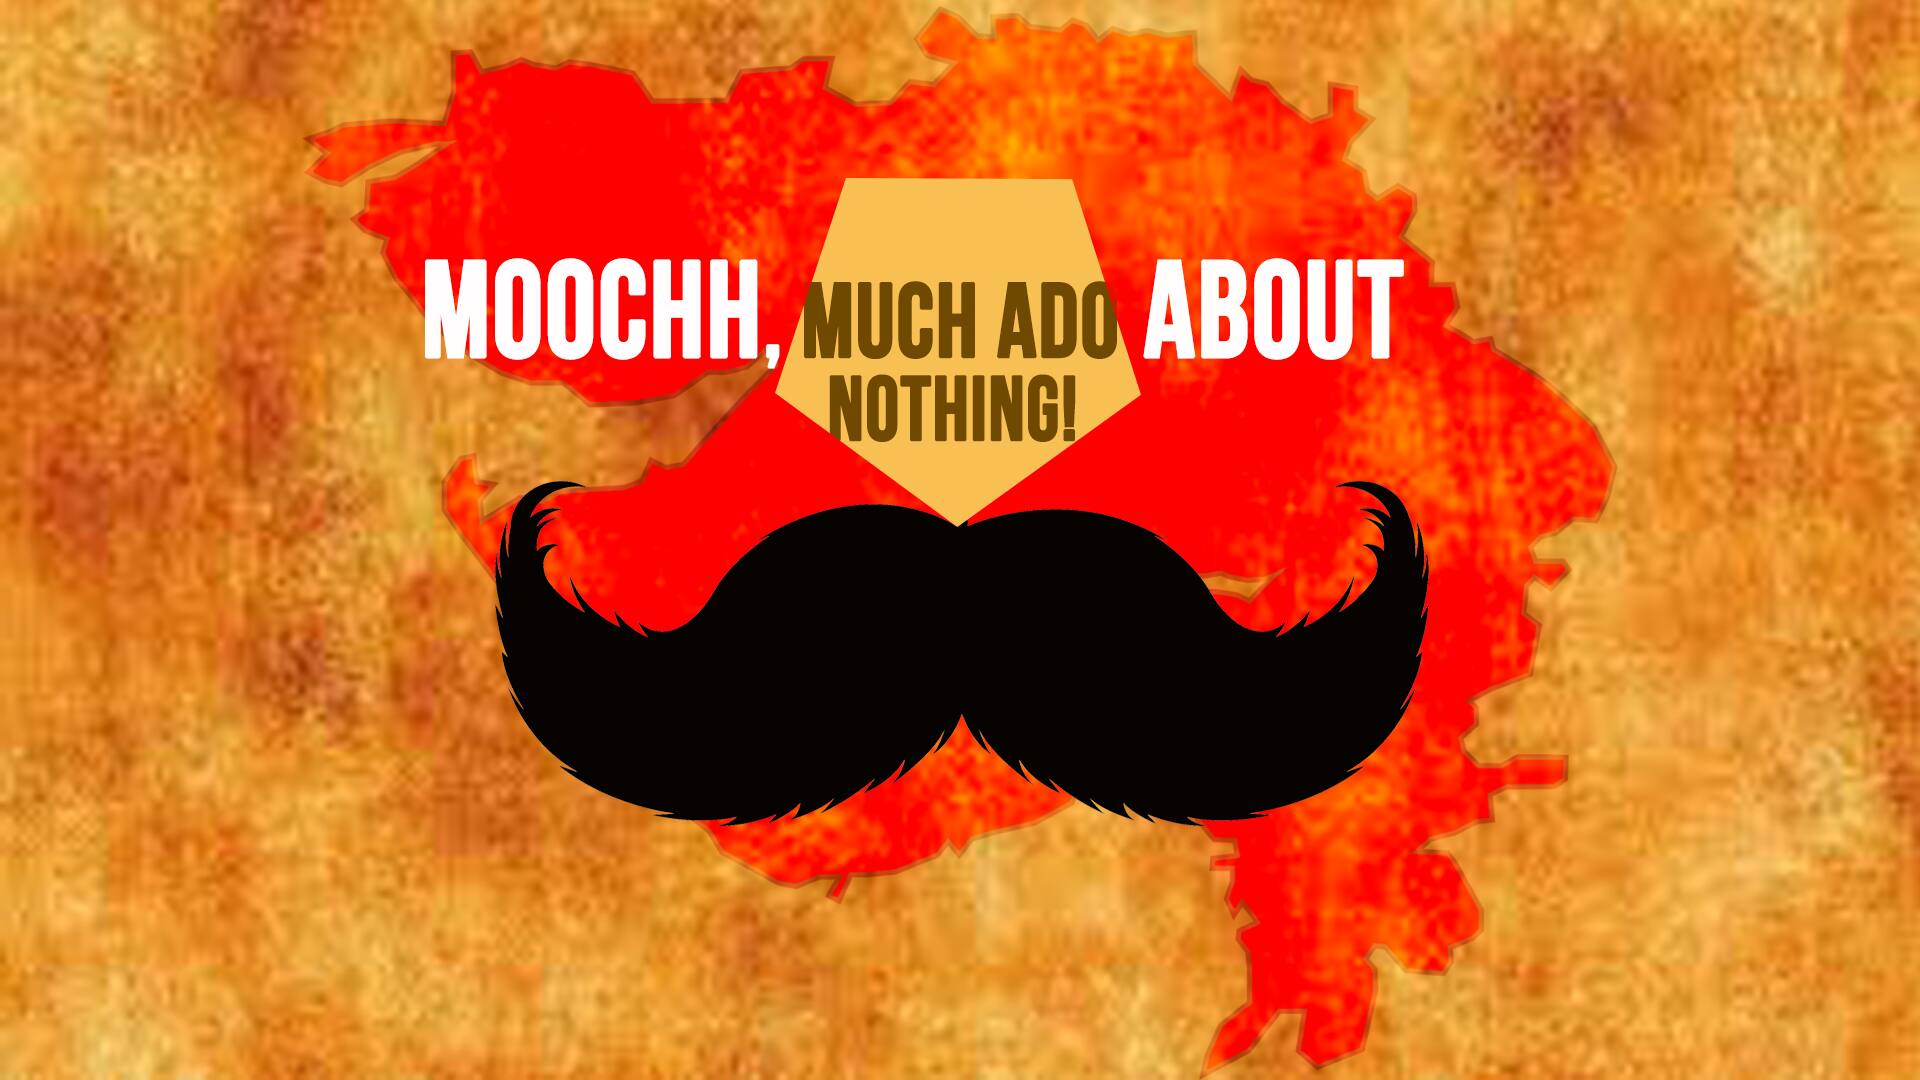 Nation discriminates: Dalit youth thrashed for sporting moustache in Gujarat